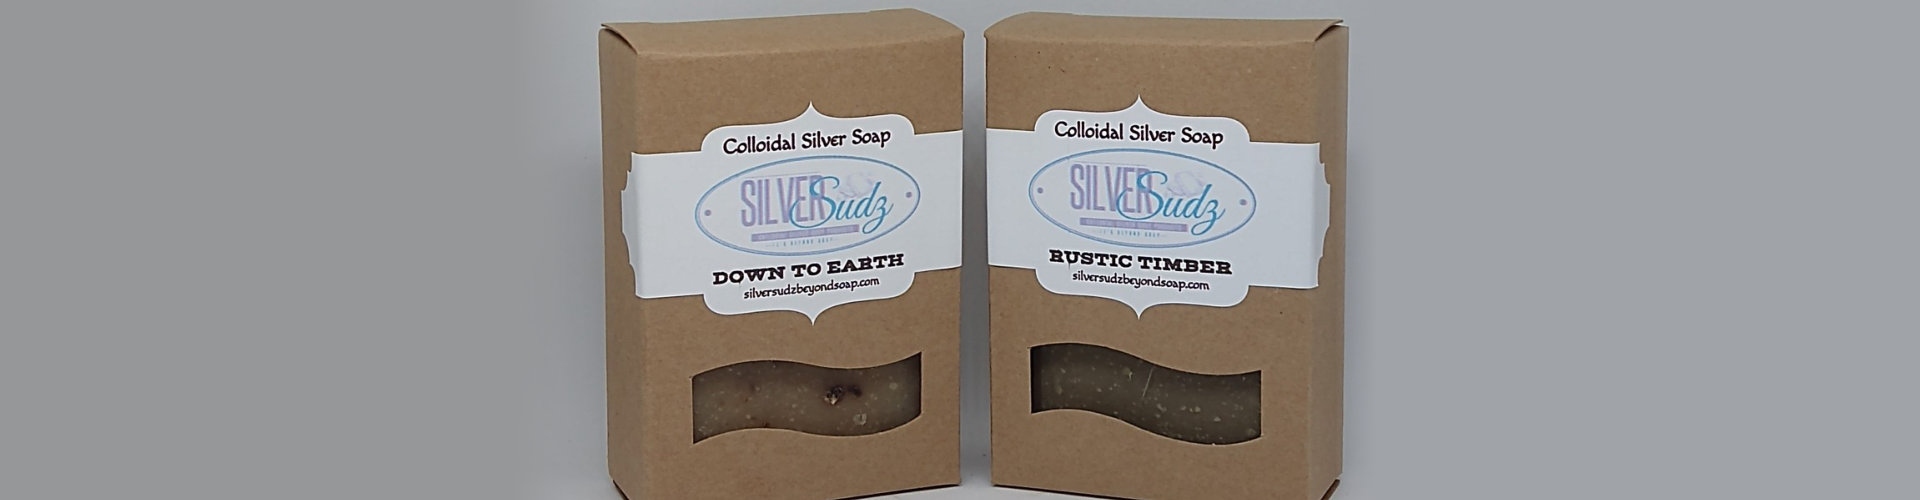 colloidal silver soap product